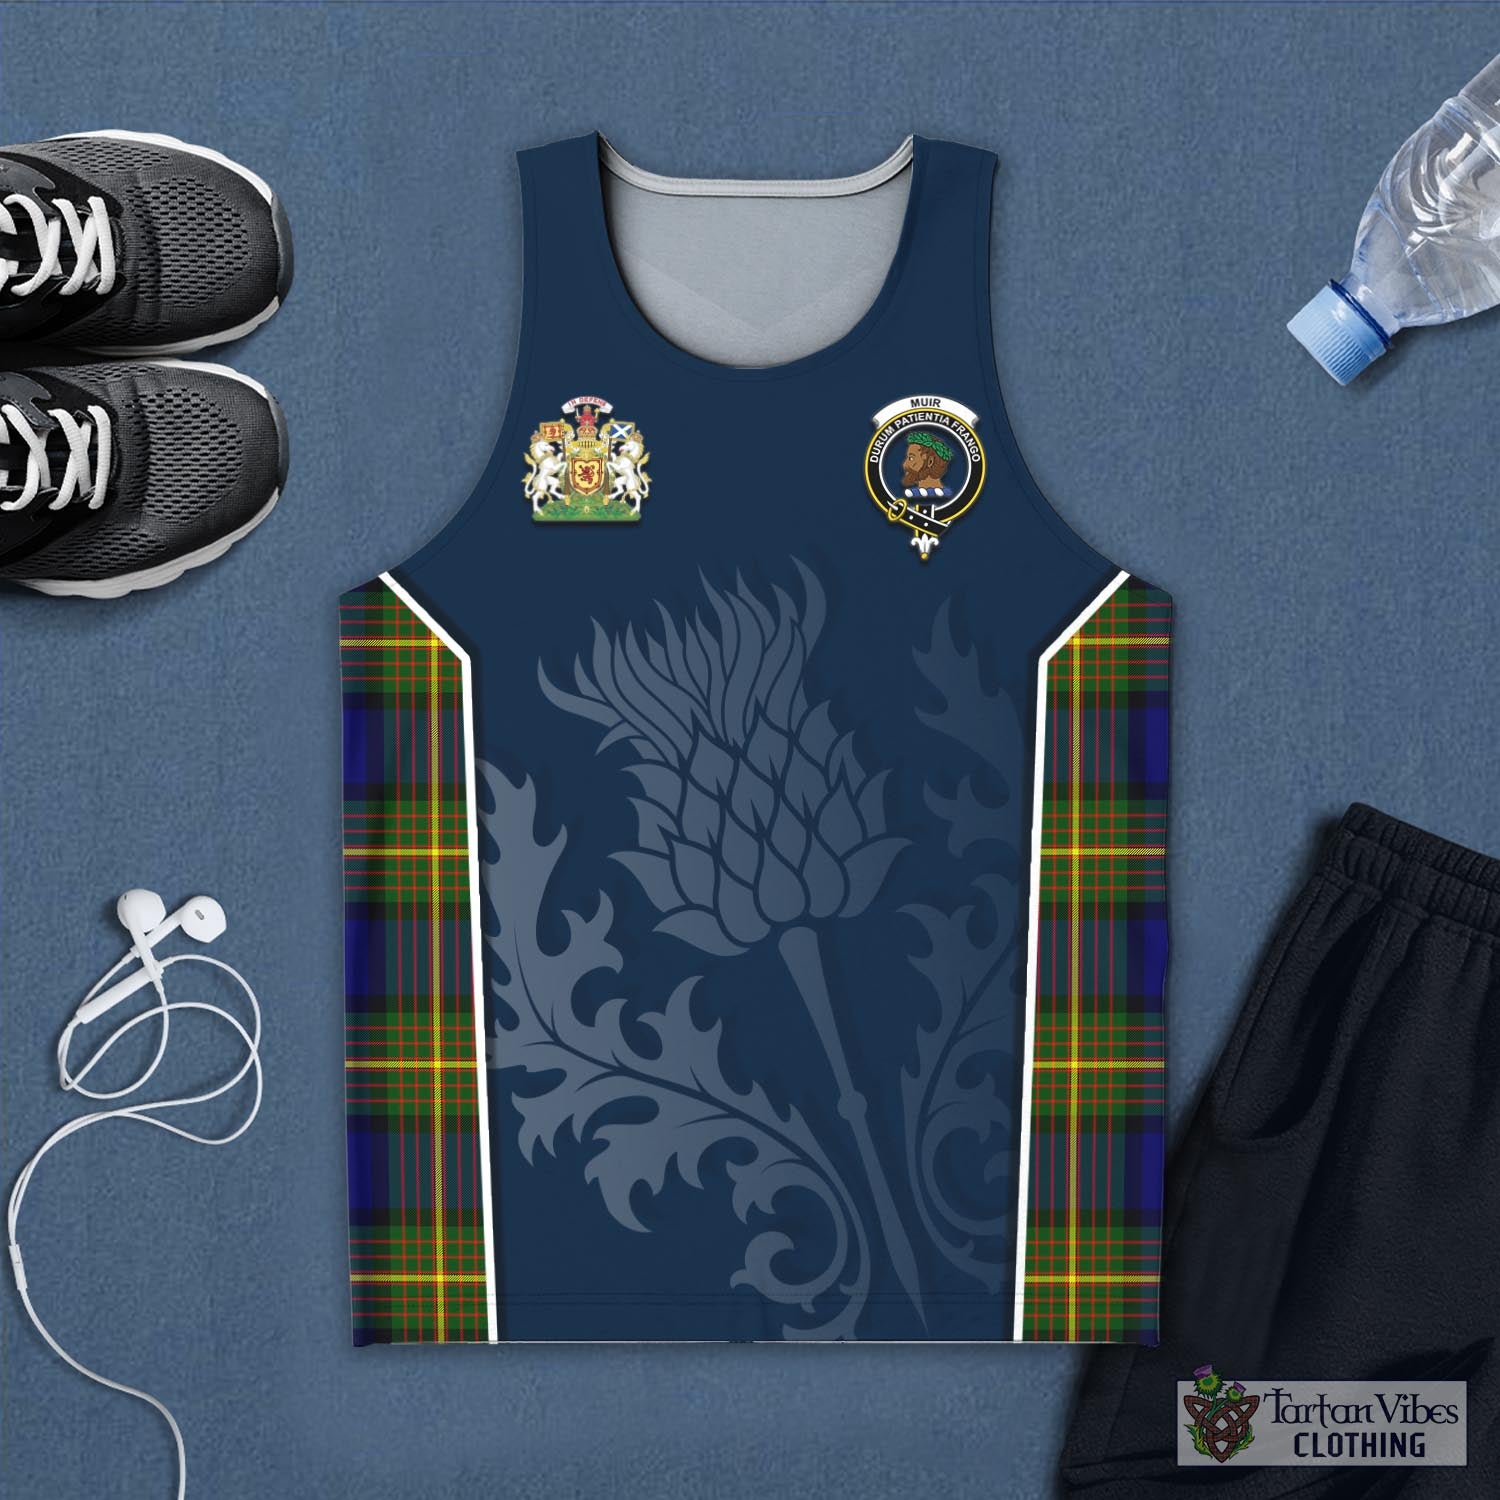 Tartan Vibes Clothing Muir Tartan Men's Tanks Top with Family Crest and Scottish Thistle Vibes Sport Style